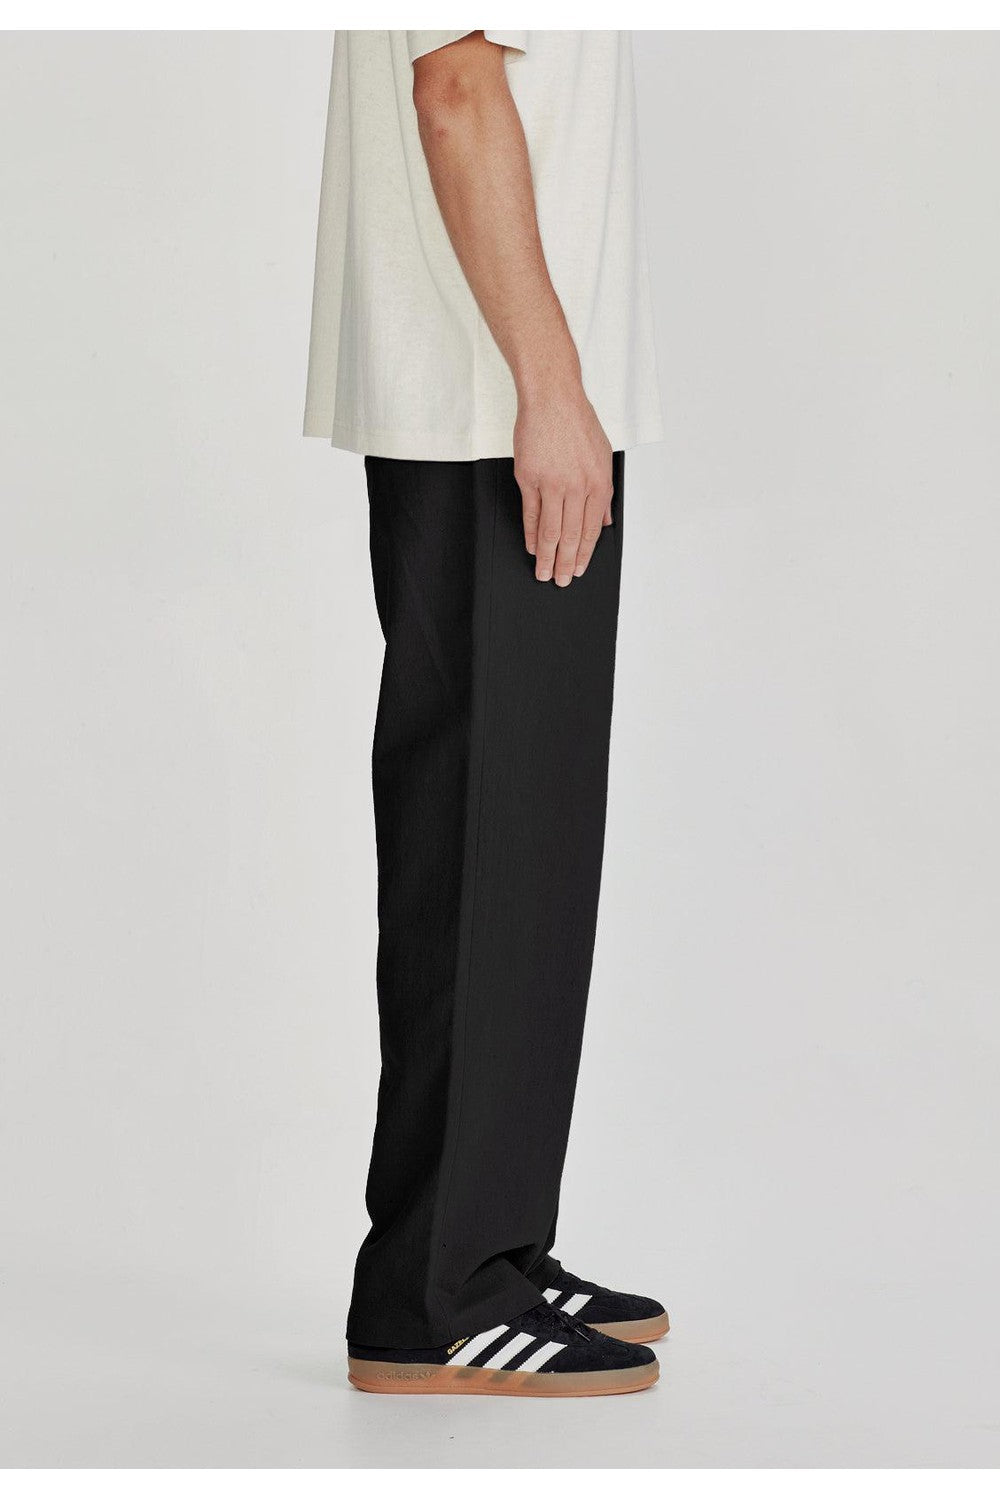 Commoners Linen/Cotton Pleat Front Pant - Black | COMMONERS | Mad About The Boy